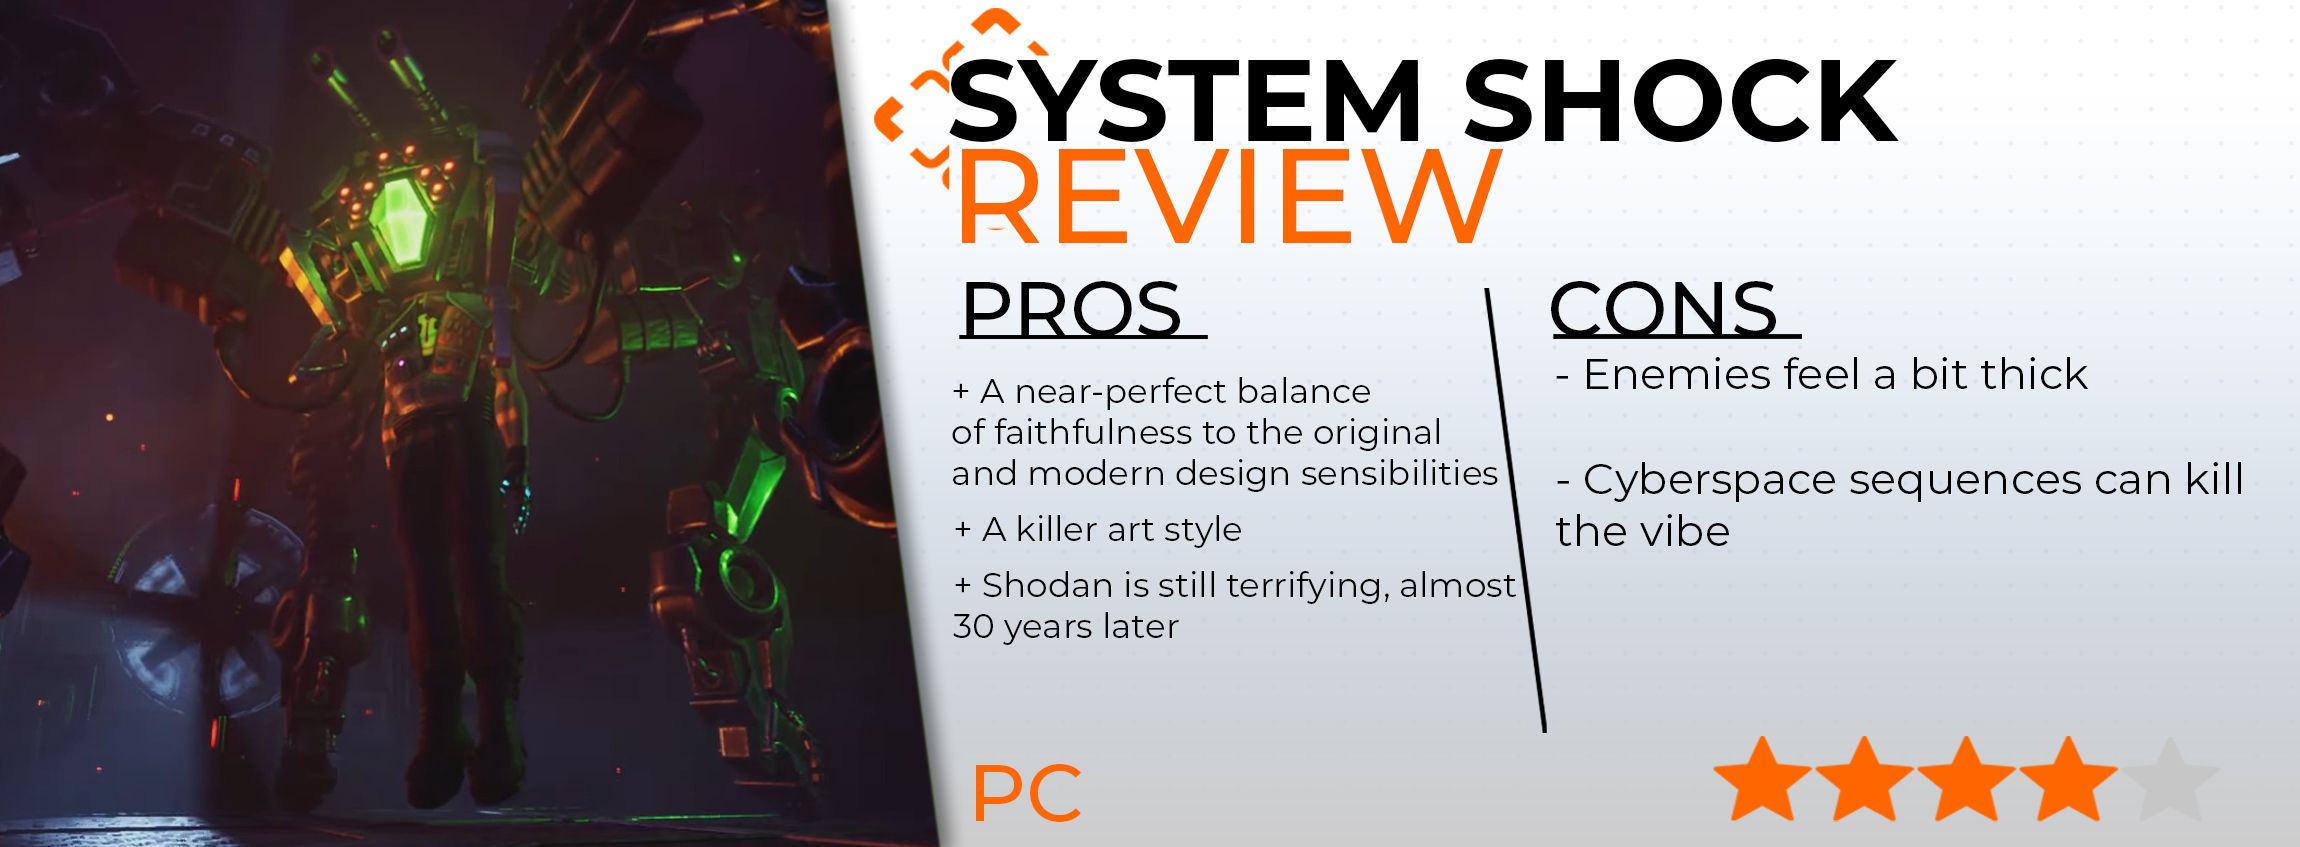 System Shock Review Card